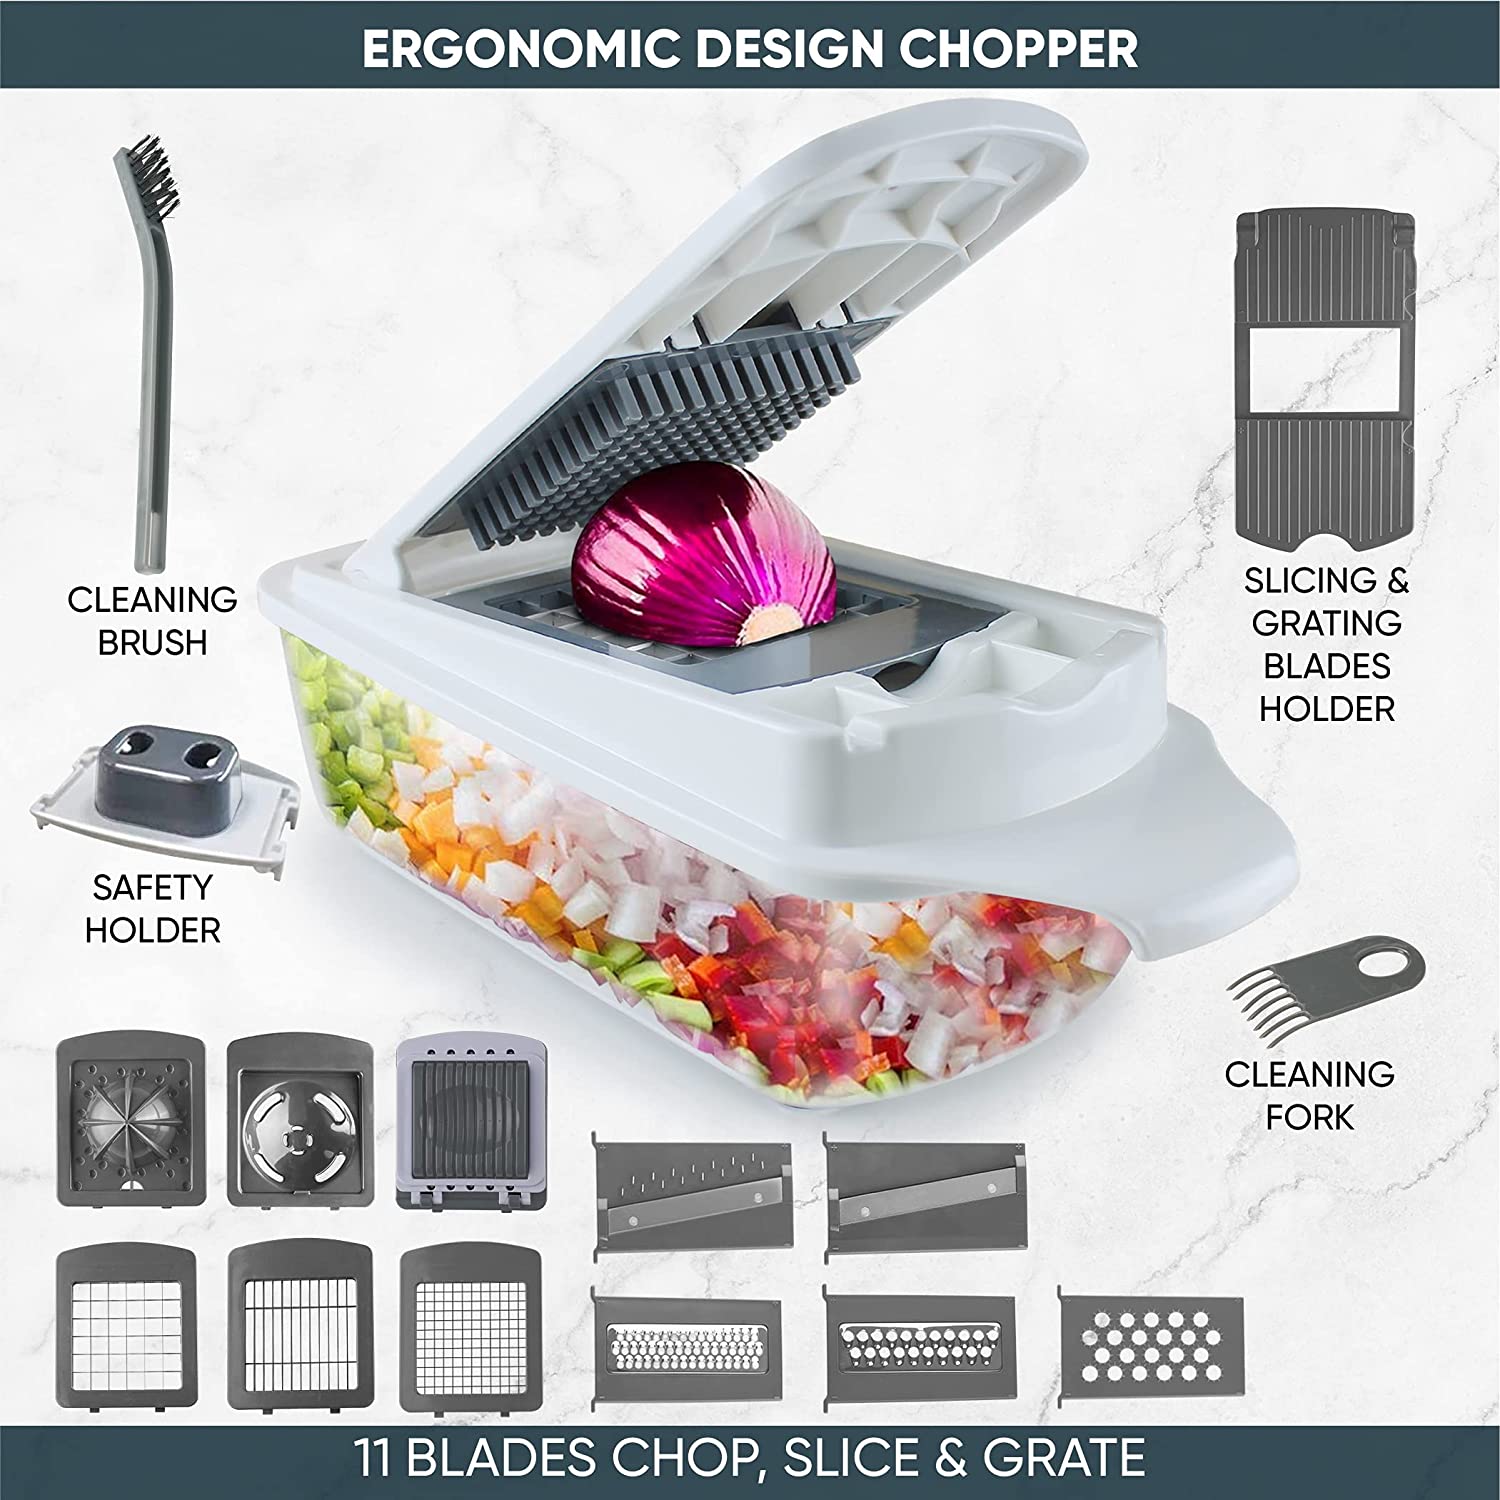 Fullstar Pro Vegetable Chopper - Slice, Dice, and Spiralize with Ease